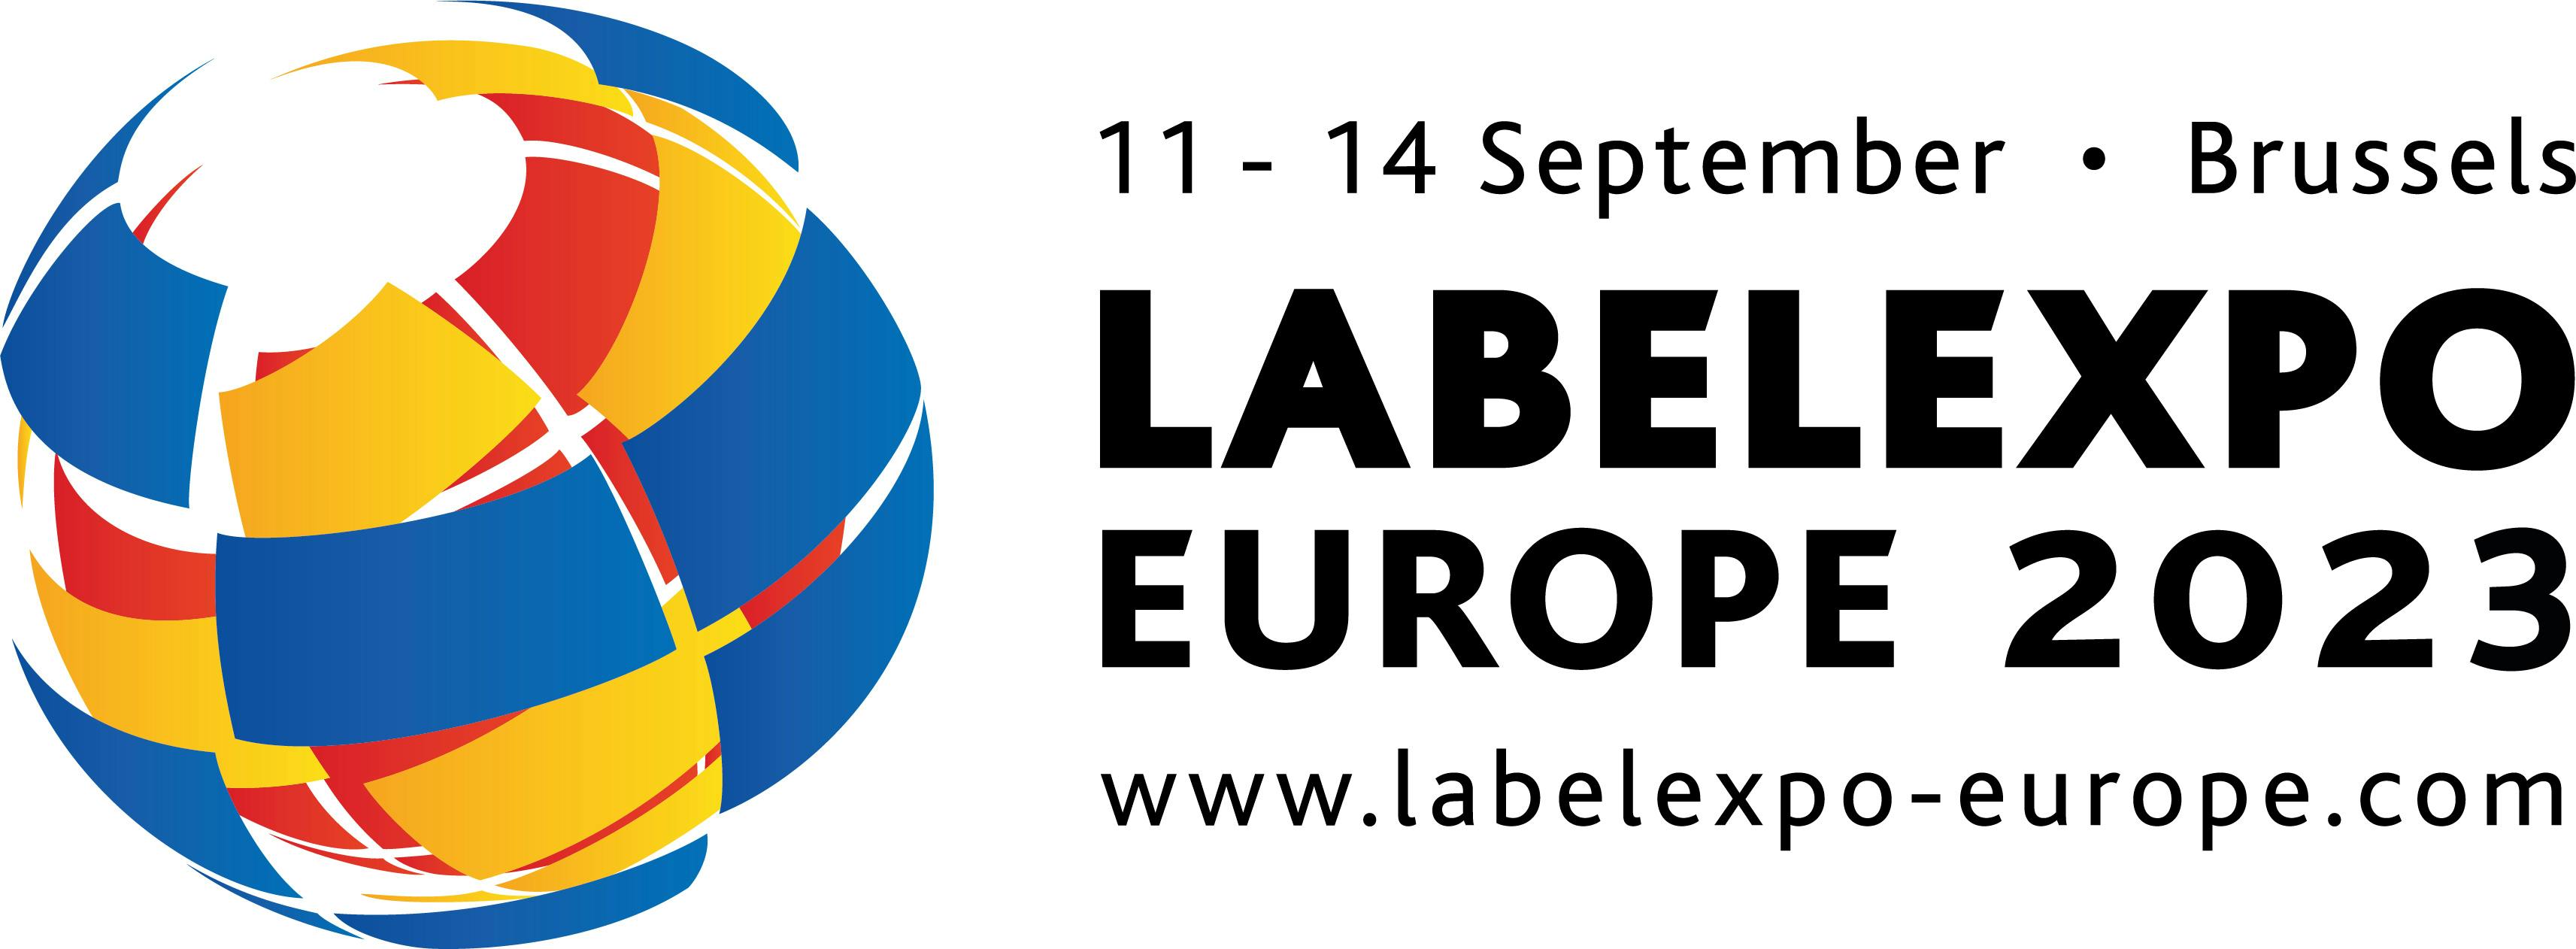 Meet UV Ray at Labelexpo Europe 2023 on stand 6E54